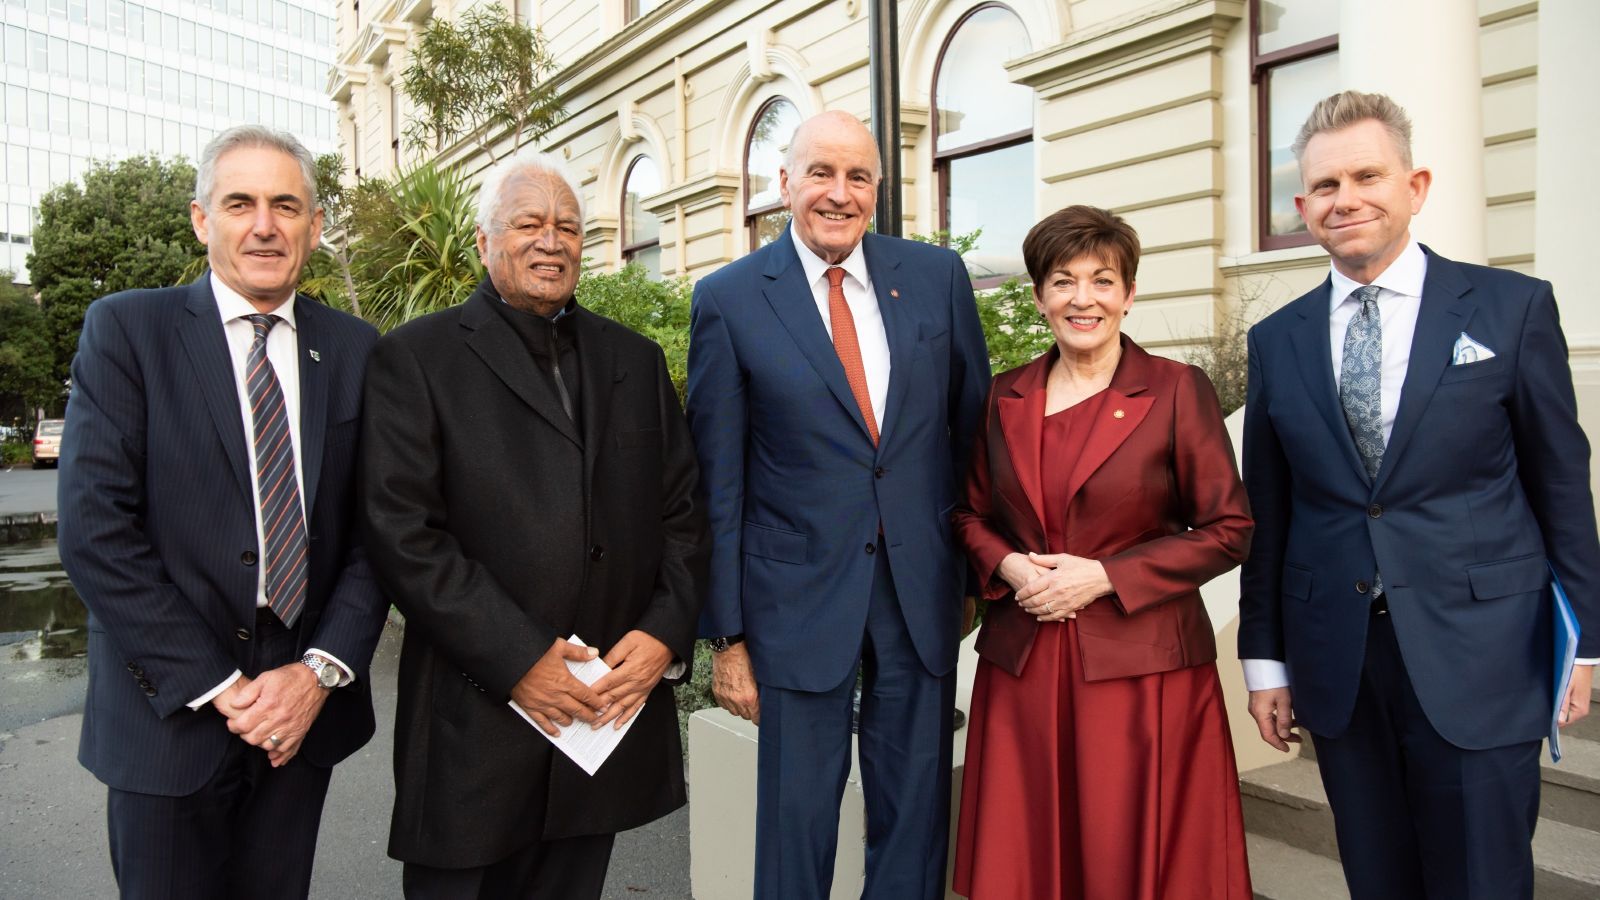 Vice Chancellor Professor Grant Guilford, Mr Joe Harawira—the Governor-General's Kaumātua, Sir David Gascoigne, and Her Excellency, The Rt Hon Dame Patsy Reddy, former Governor-General of New Zealand